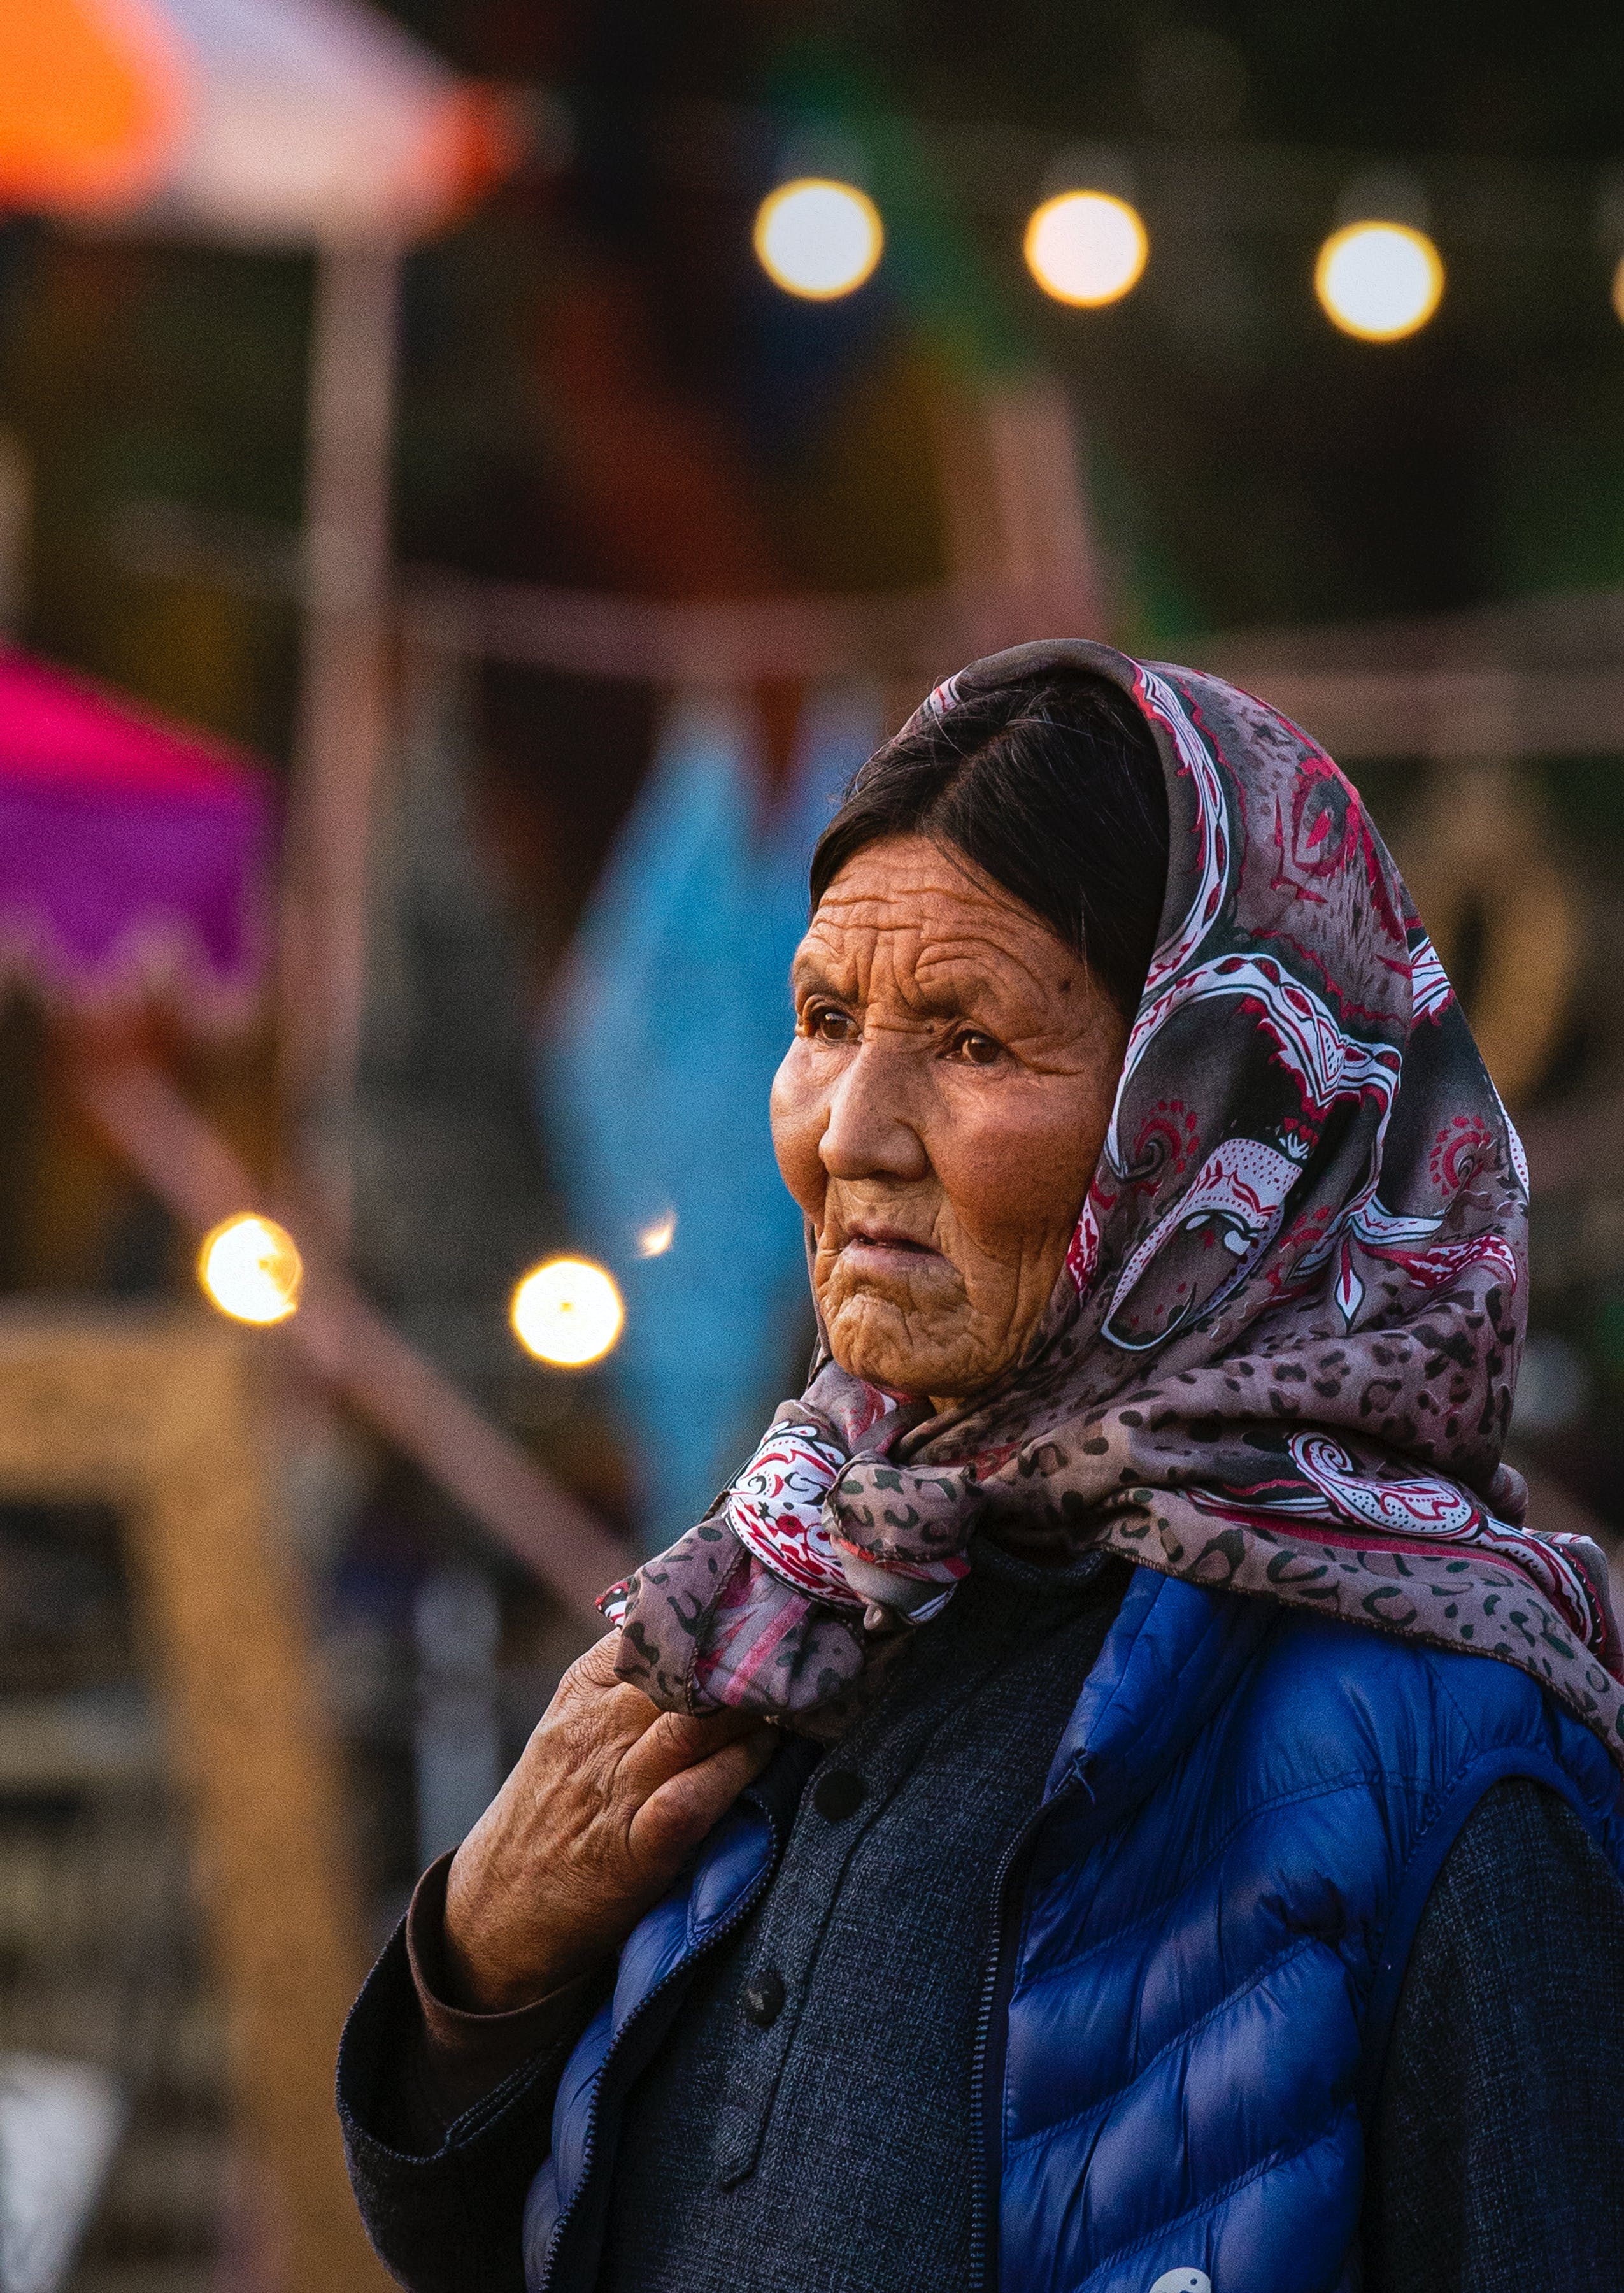 A photo of an elderly woman. | Source: Pexels